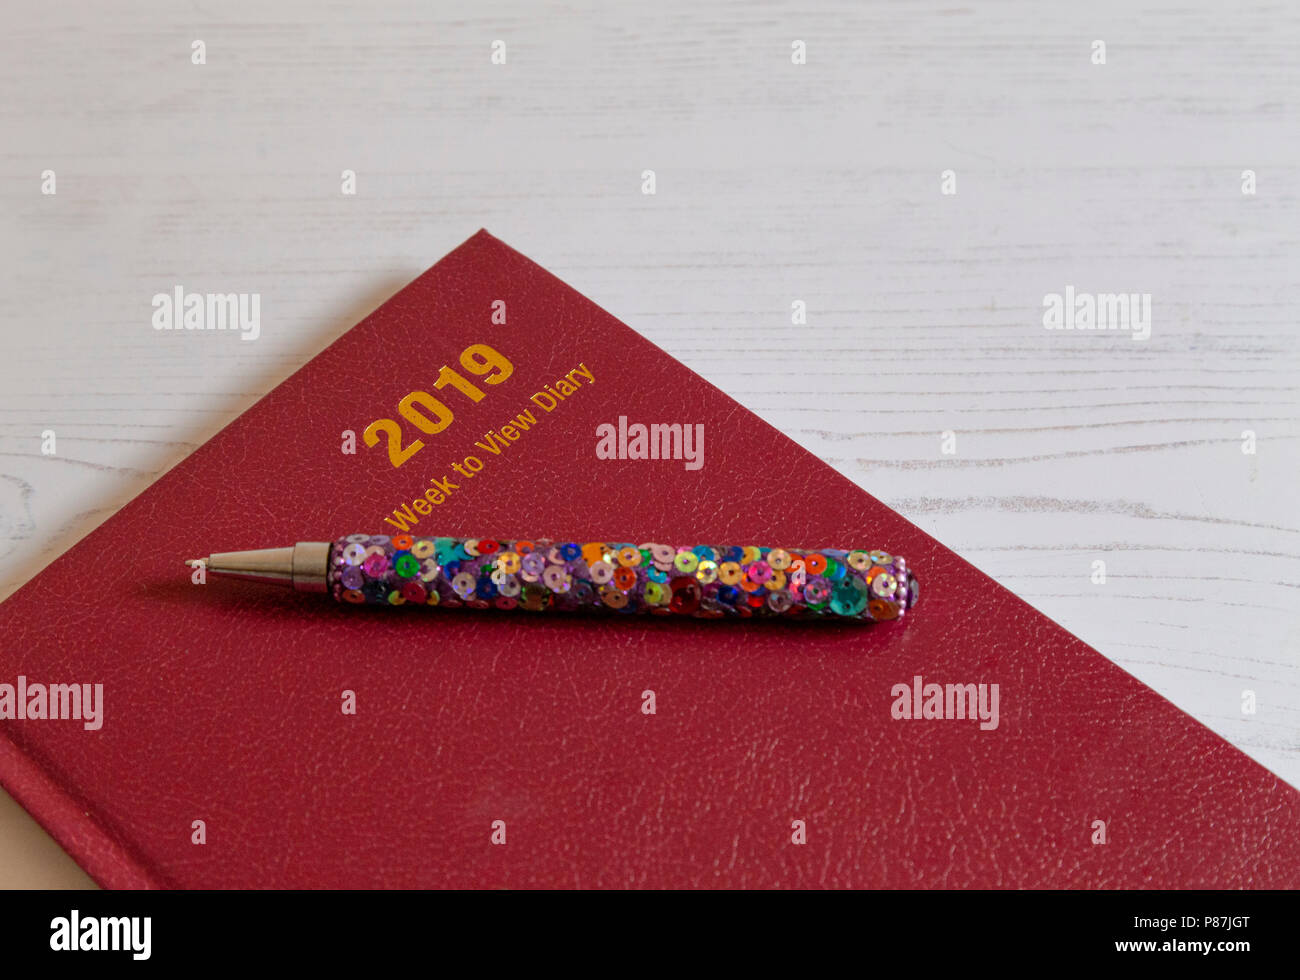 A red 2019 desk diary with a pen. Stock Photo